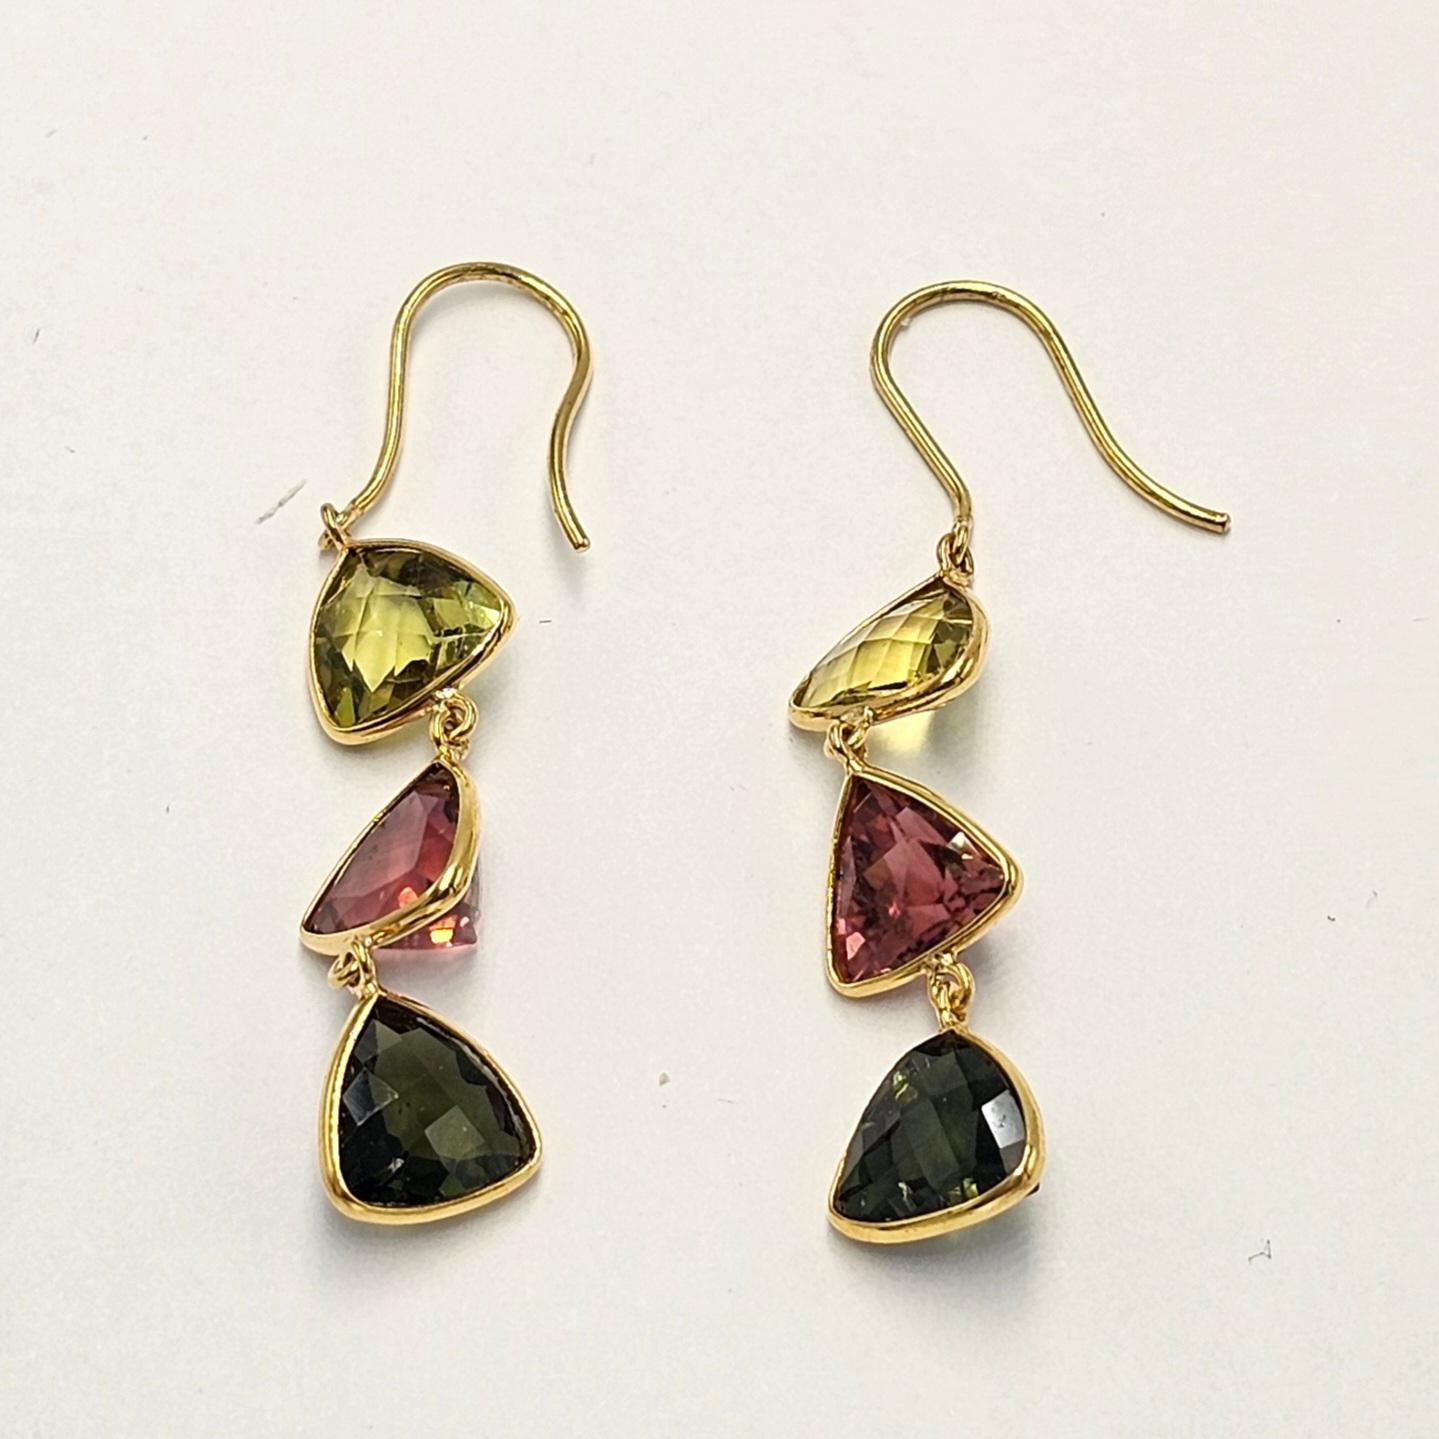 Hand crafted with hand picked beautiful Multi Color tourmaline as there center stones, this pair of earrings is perfect for every occasion and has a blend of modern and classic style! With our in house manufacturing of jewelry and cutting and